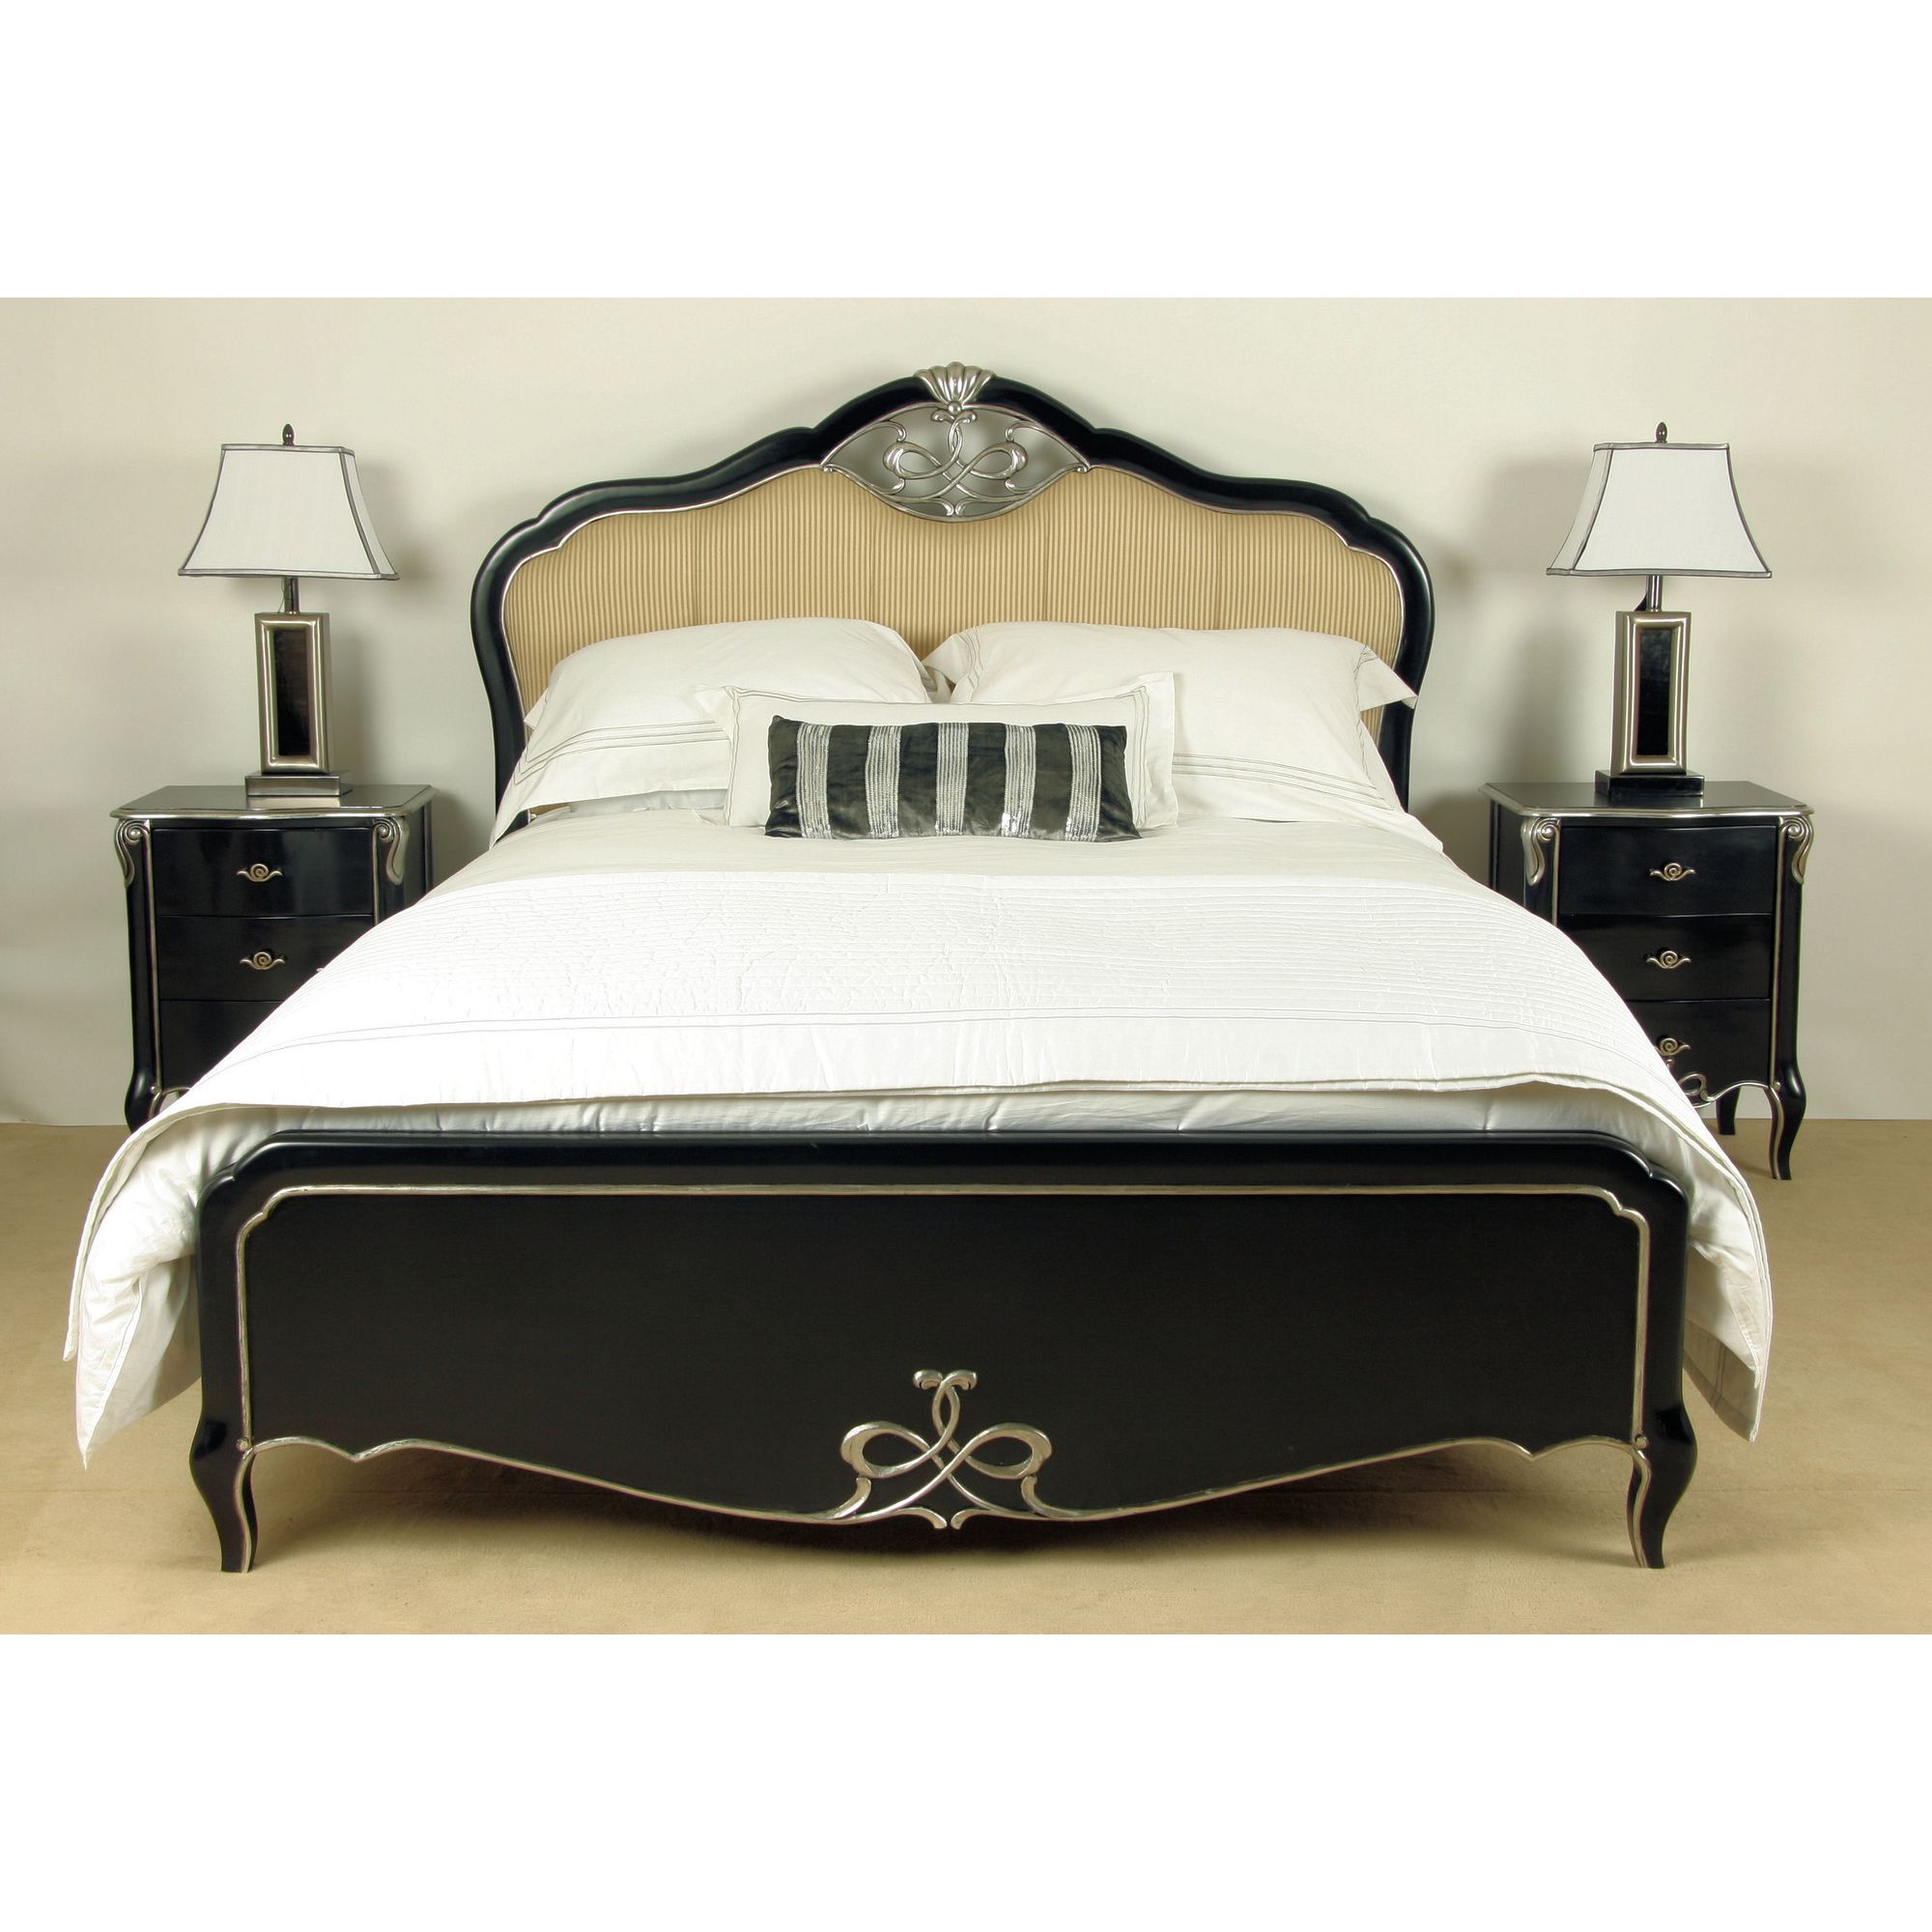 Wildwood Coco Bed Frame - Double at Tesco Direct